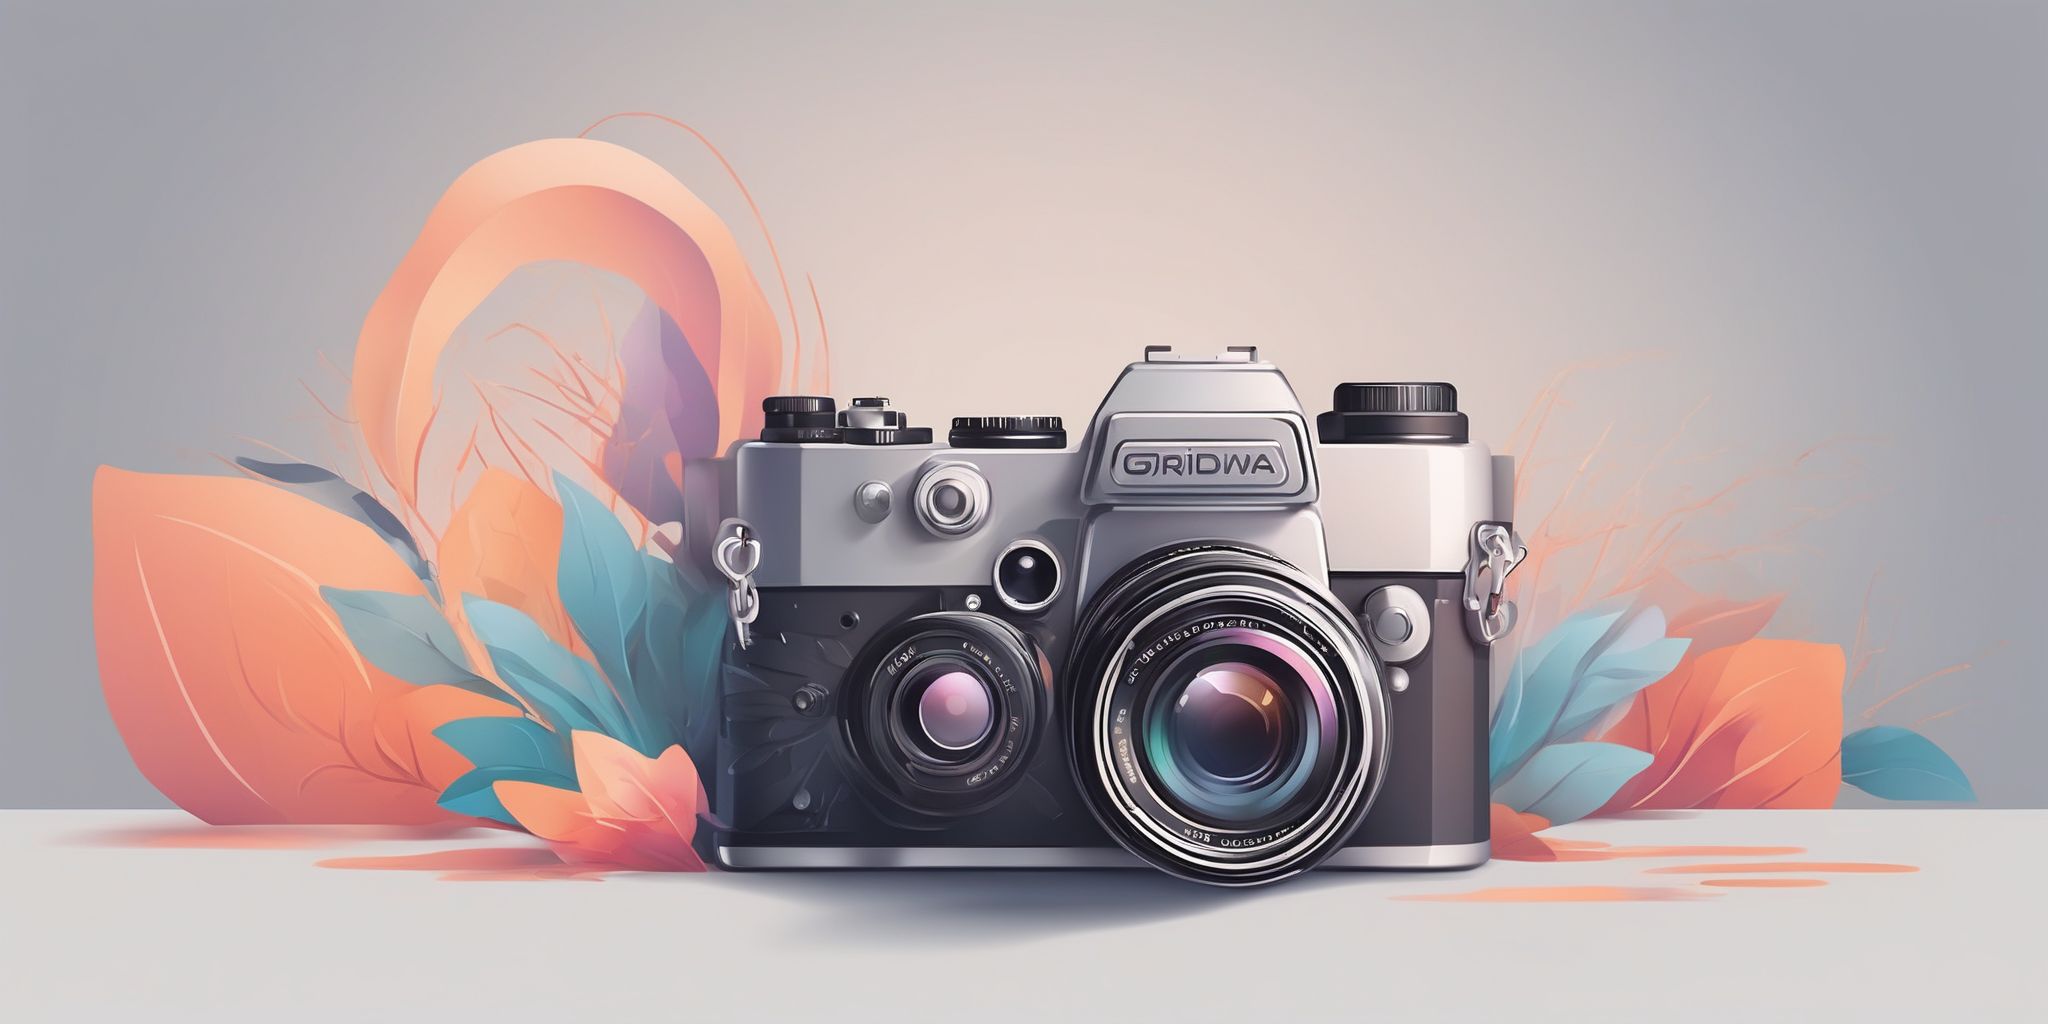 Camera in illustration style with gradients and white background